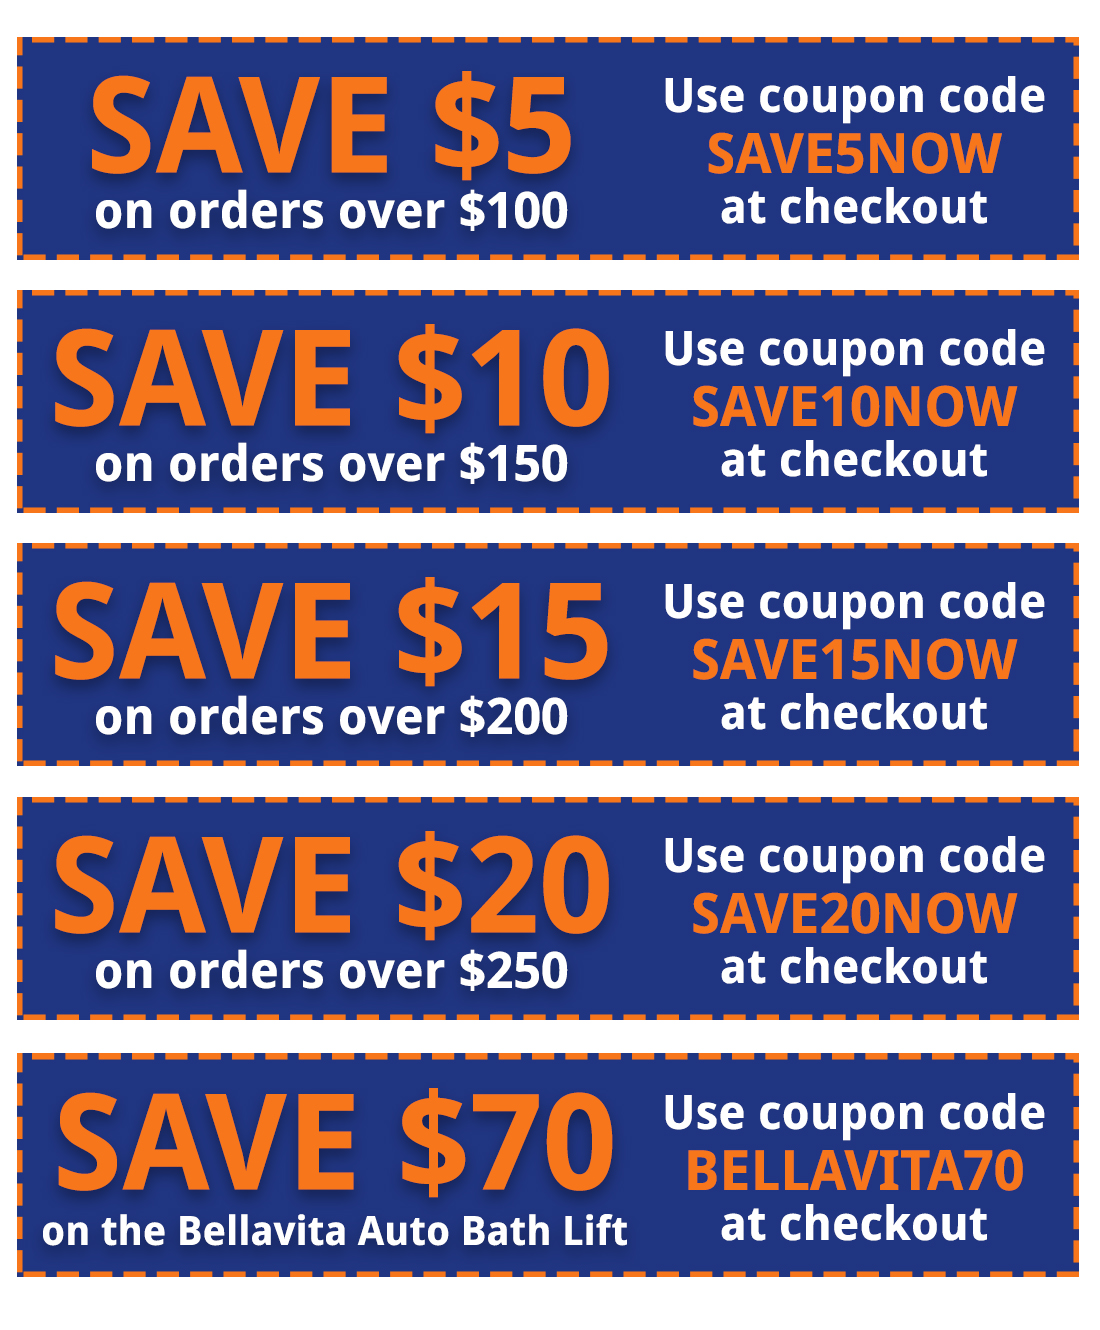 mchm-coupons-june-2015.jpg